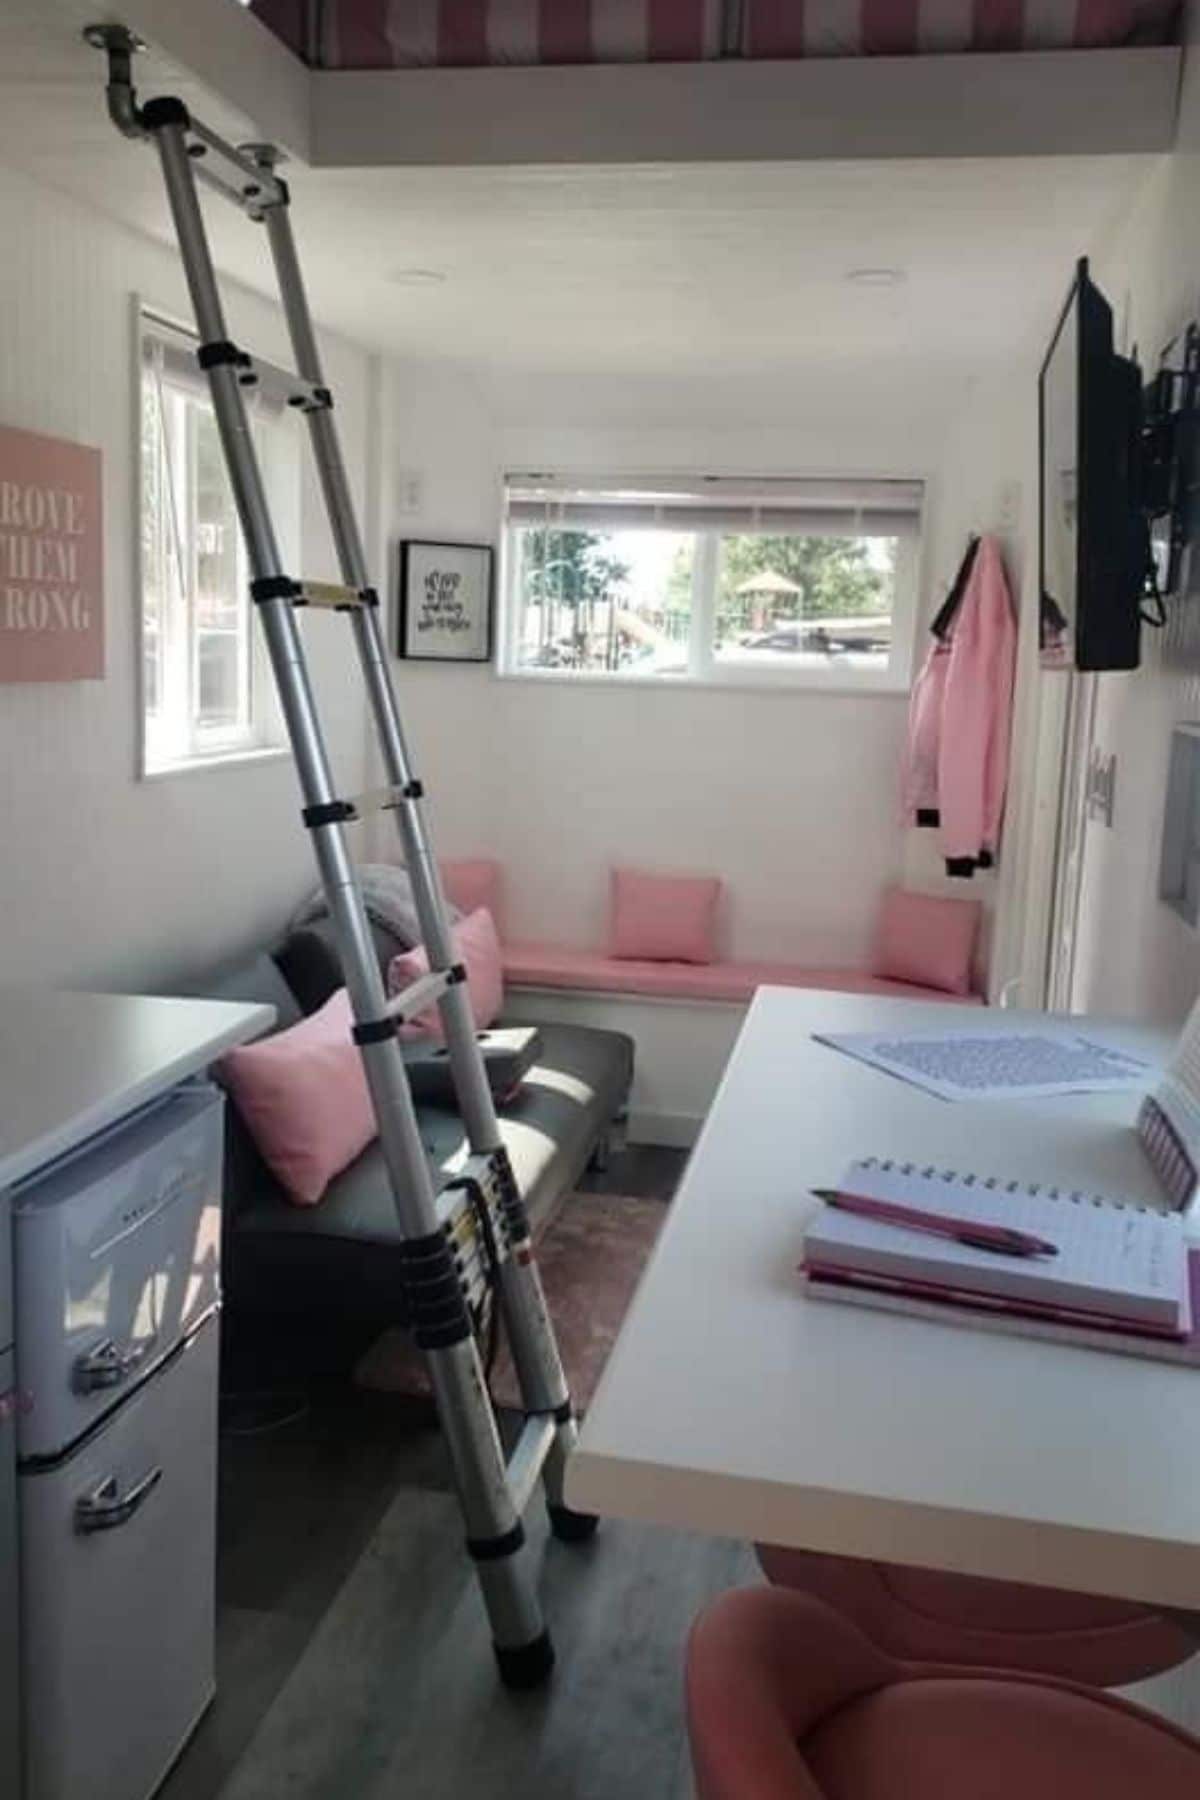 ladder to loft between sofa and counter